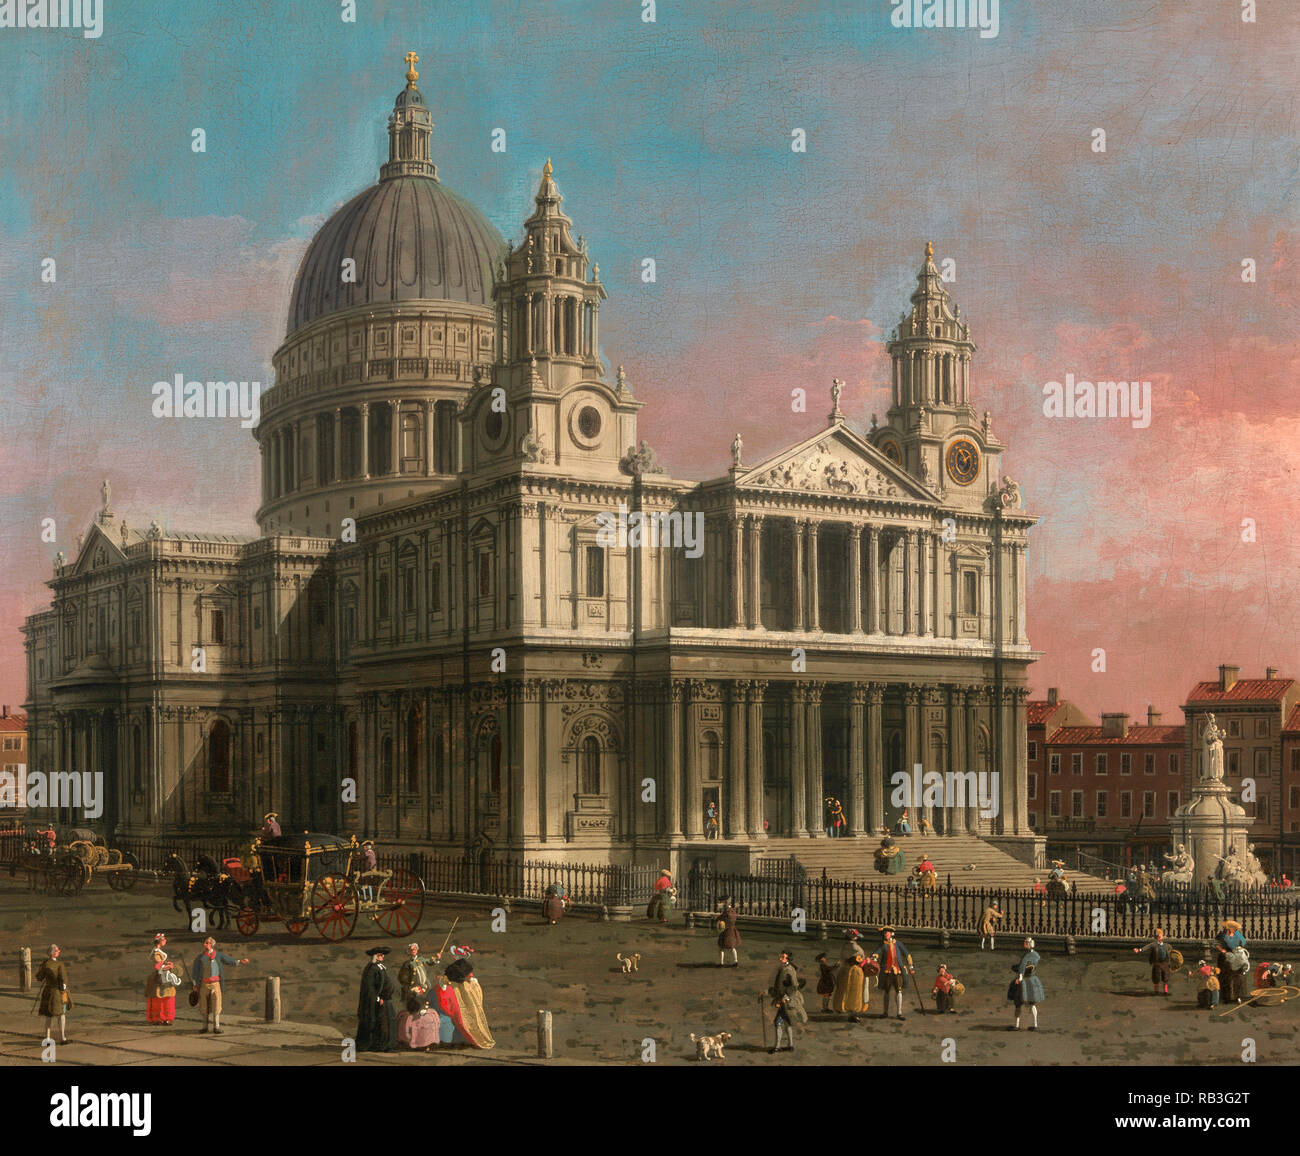 St. Paul's Cathedral - Canaletto, ca. 1754 Stockfoto